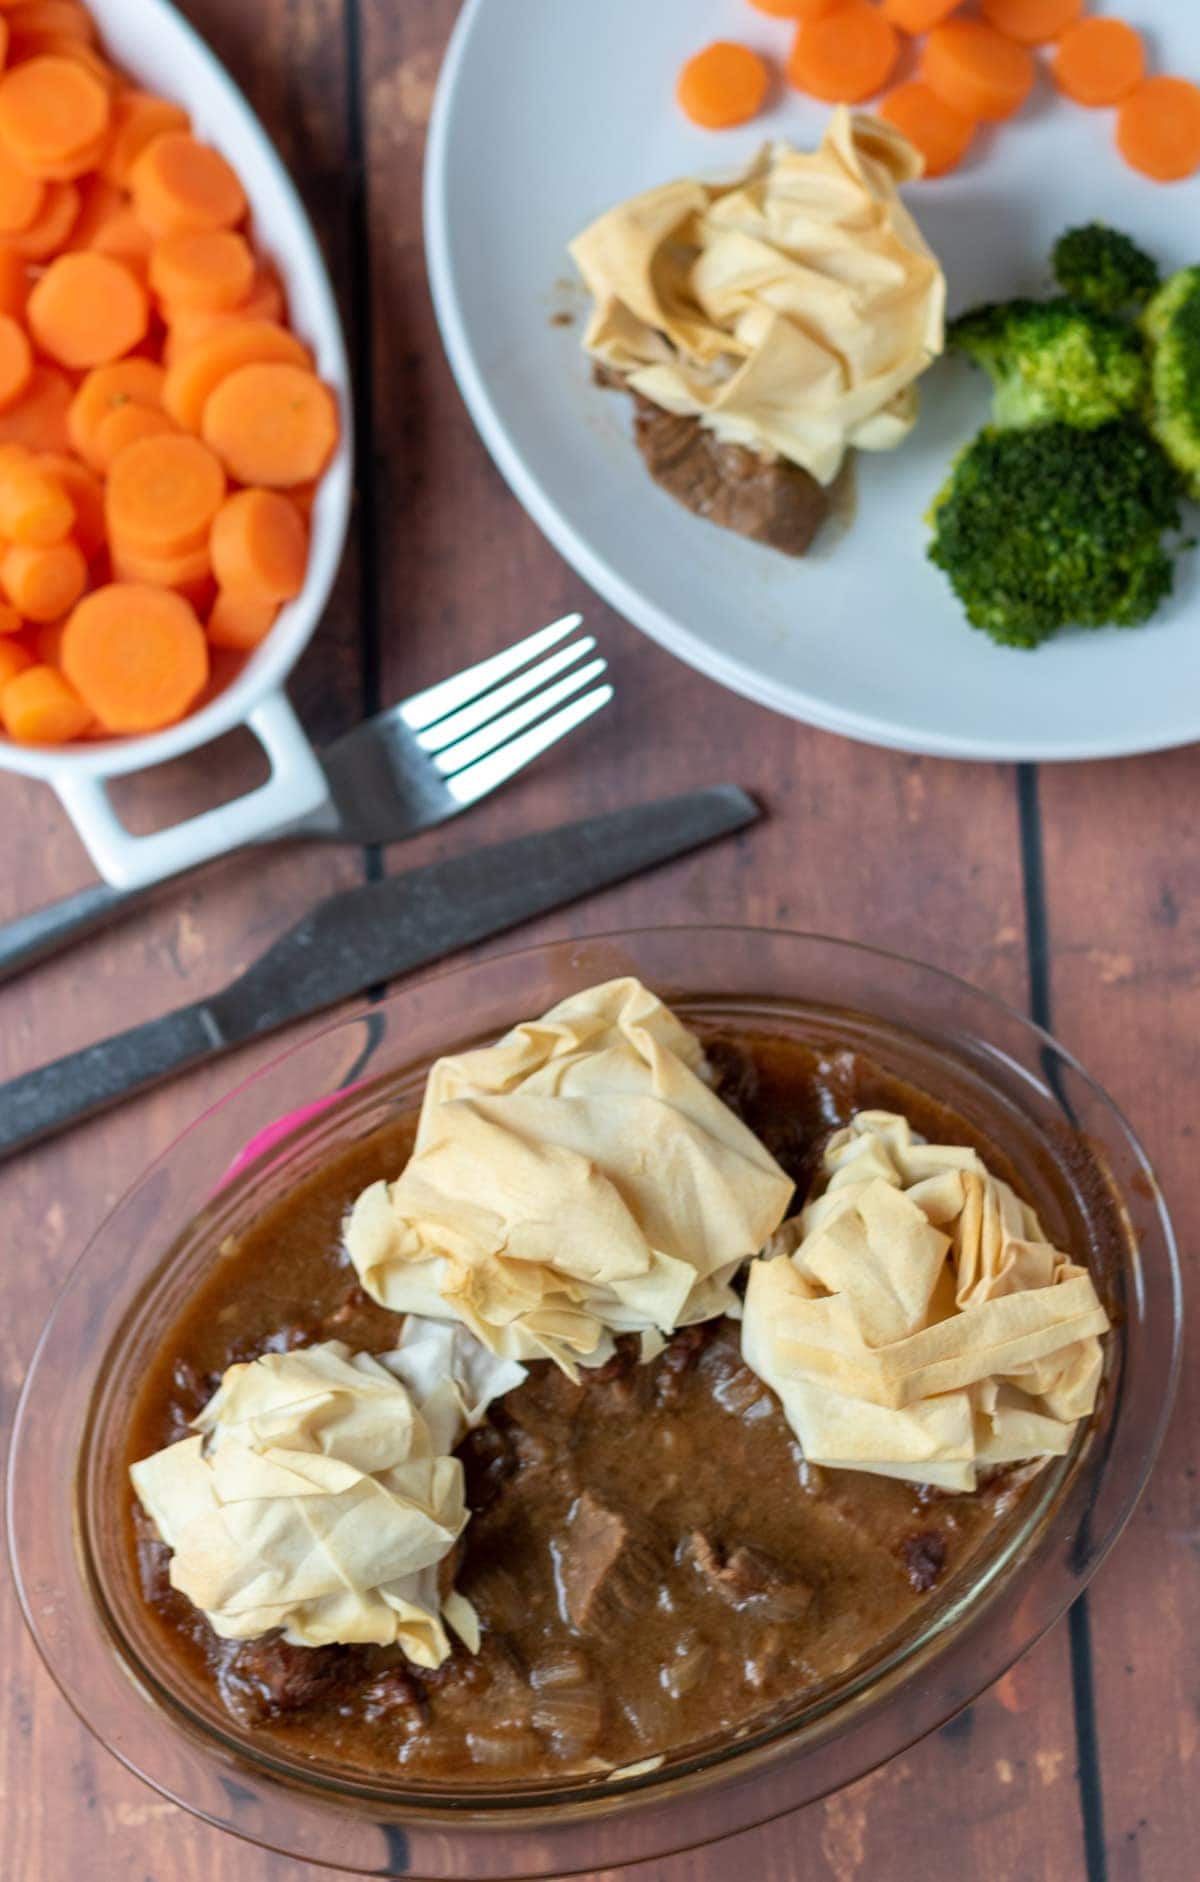 Bired eye view of steak pie with filo pastry on top. A portion has been removed and plated in the background with broccoli and carrot sides.